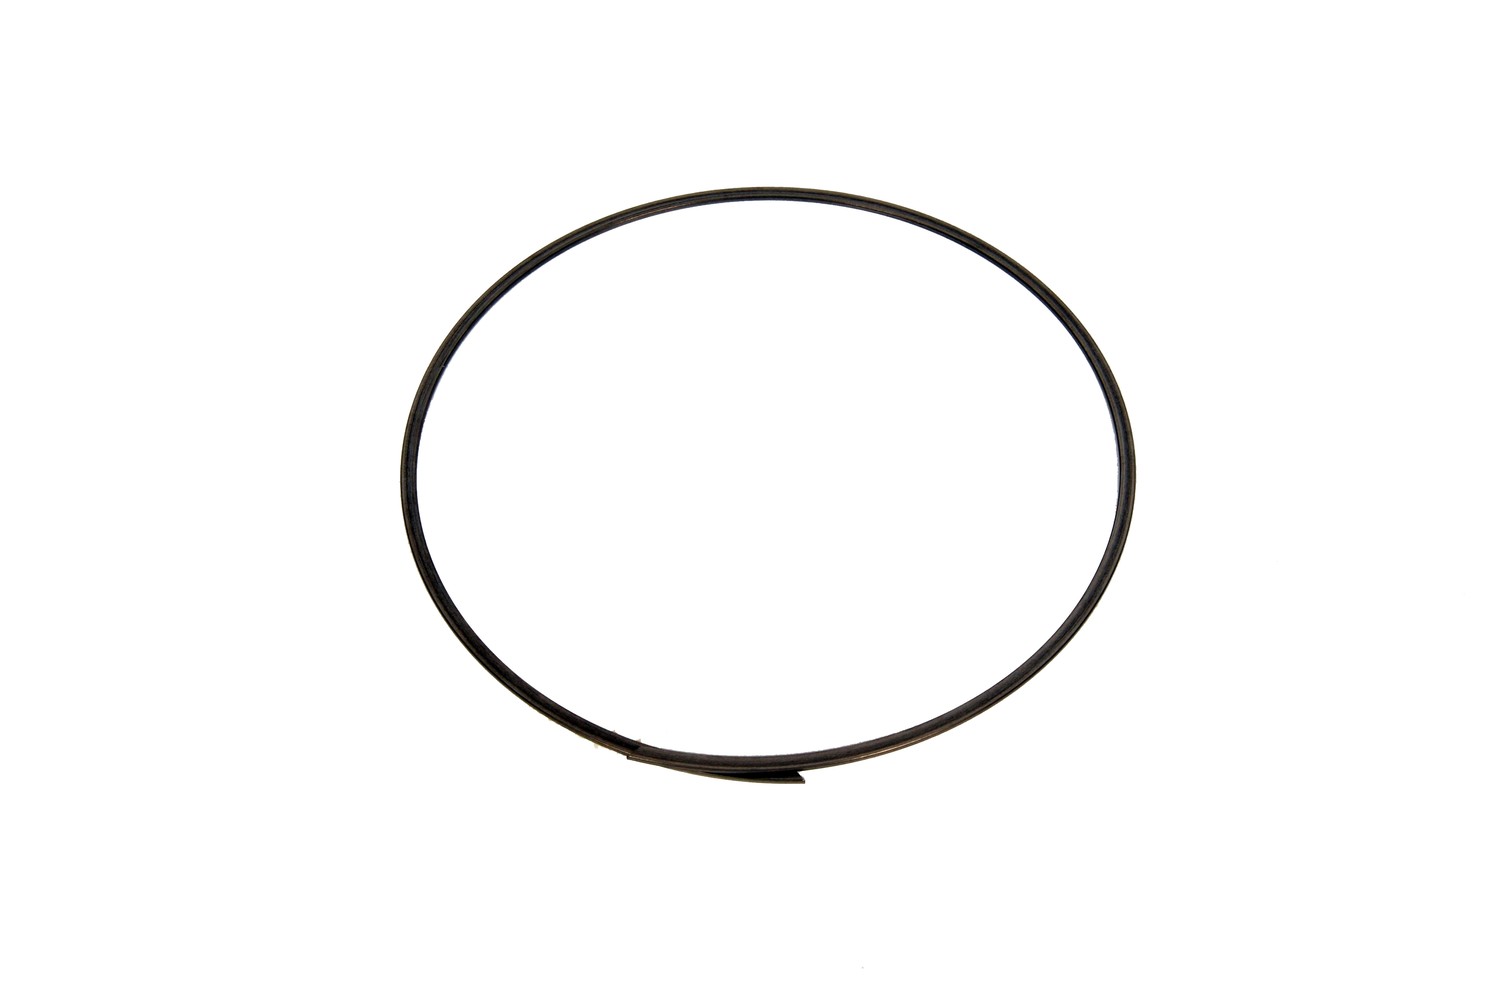 GM GENUINE PARTS CANADA - Automatic Transmission Clutch Spring Retaining Ring - GMC 24263709